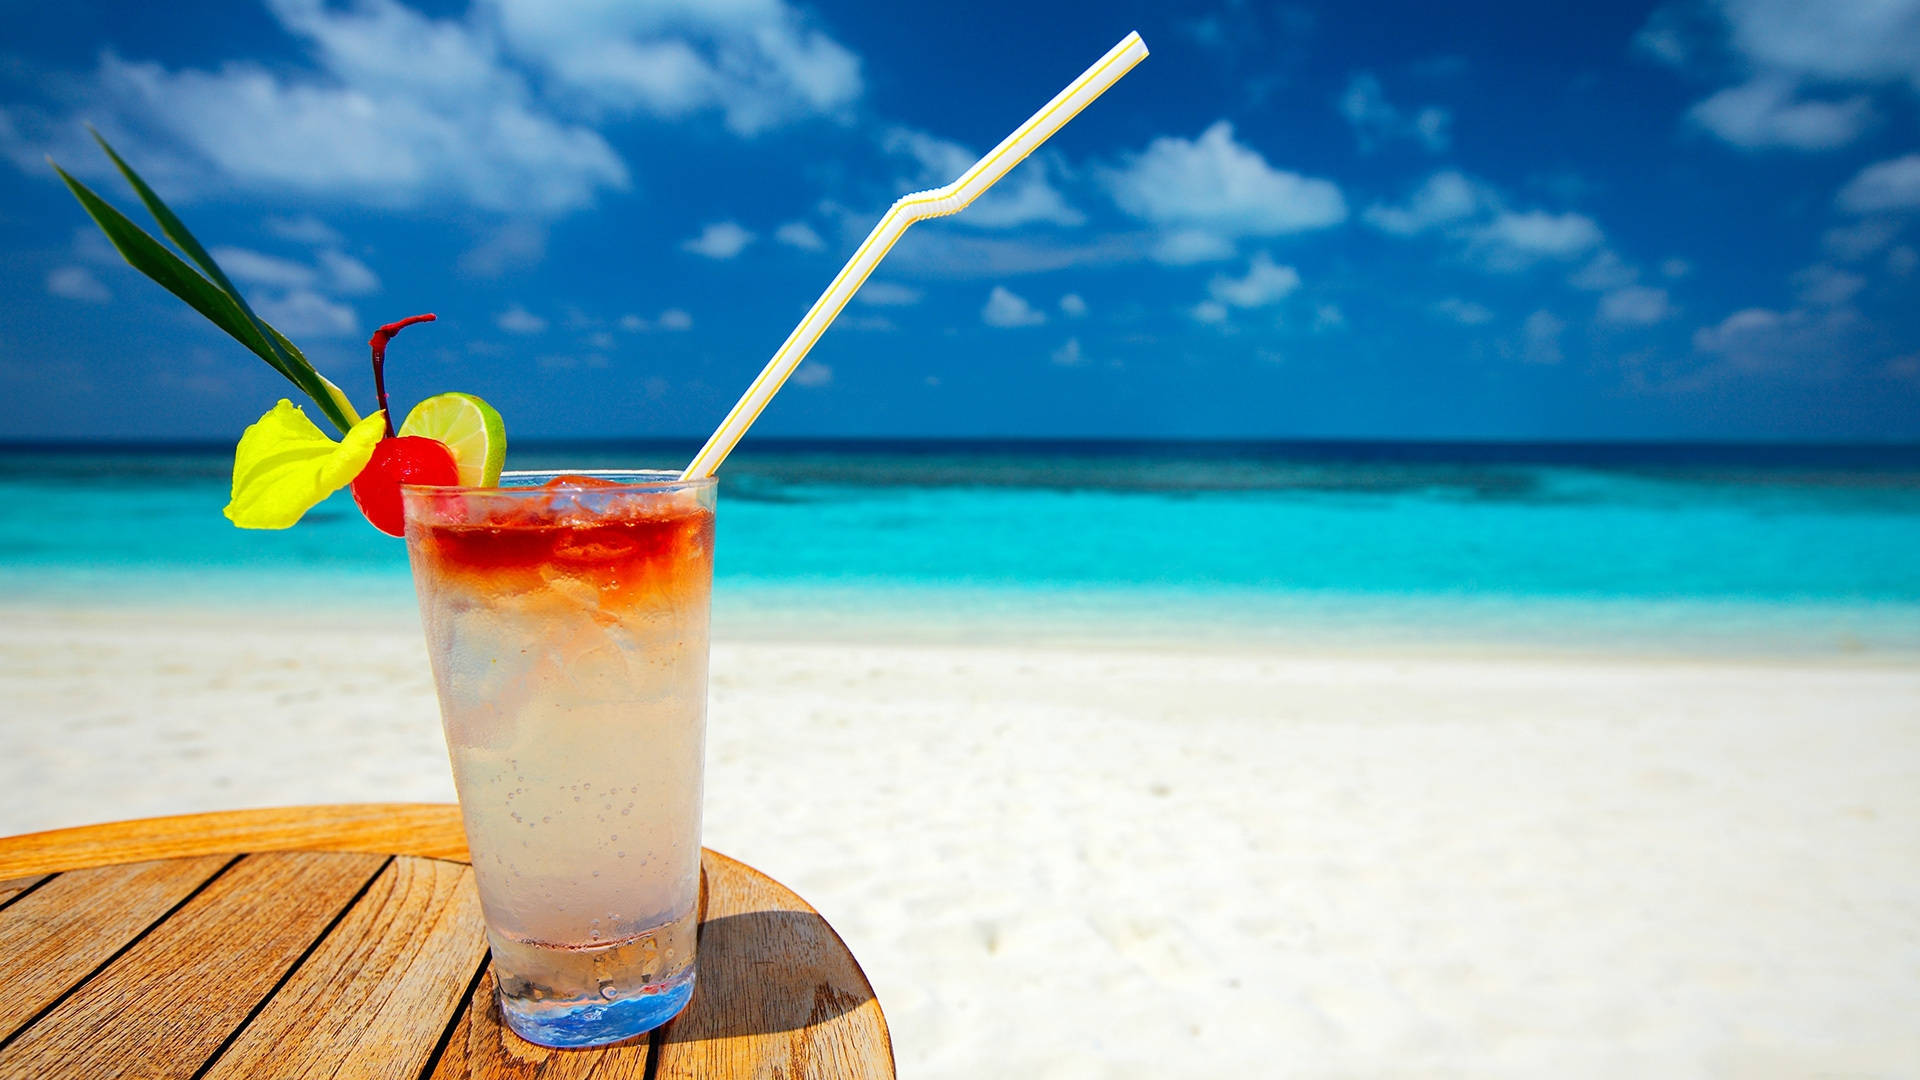 Cute Summer Ice Cold Beverage Wallpaper